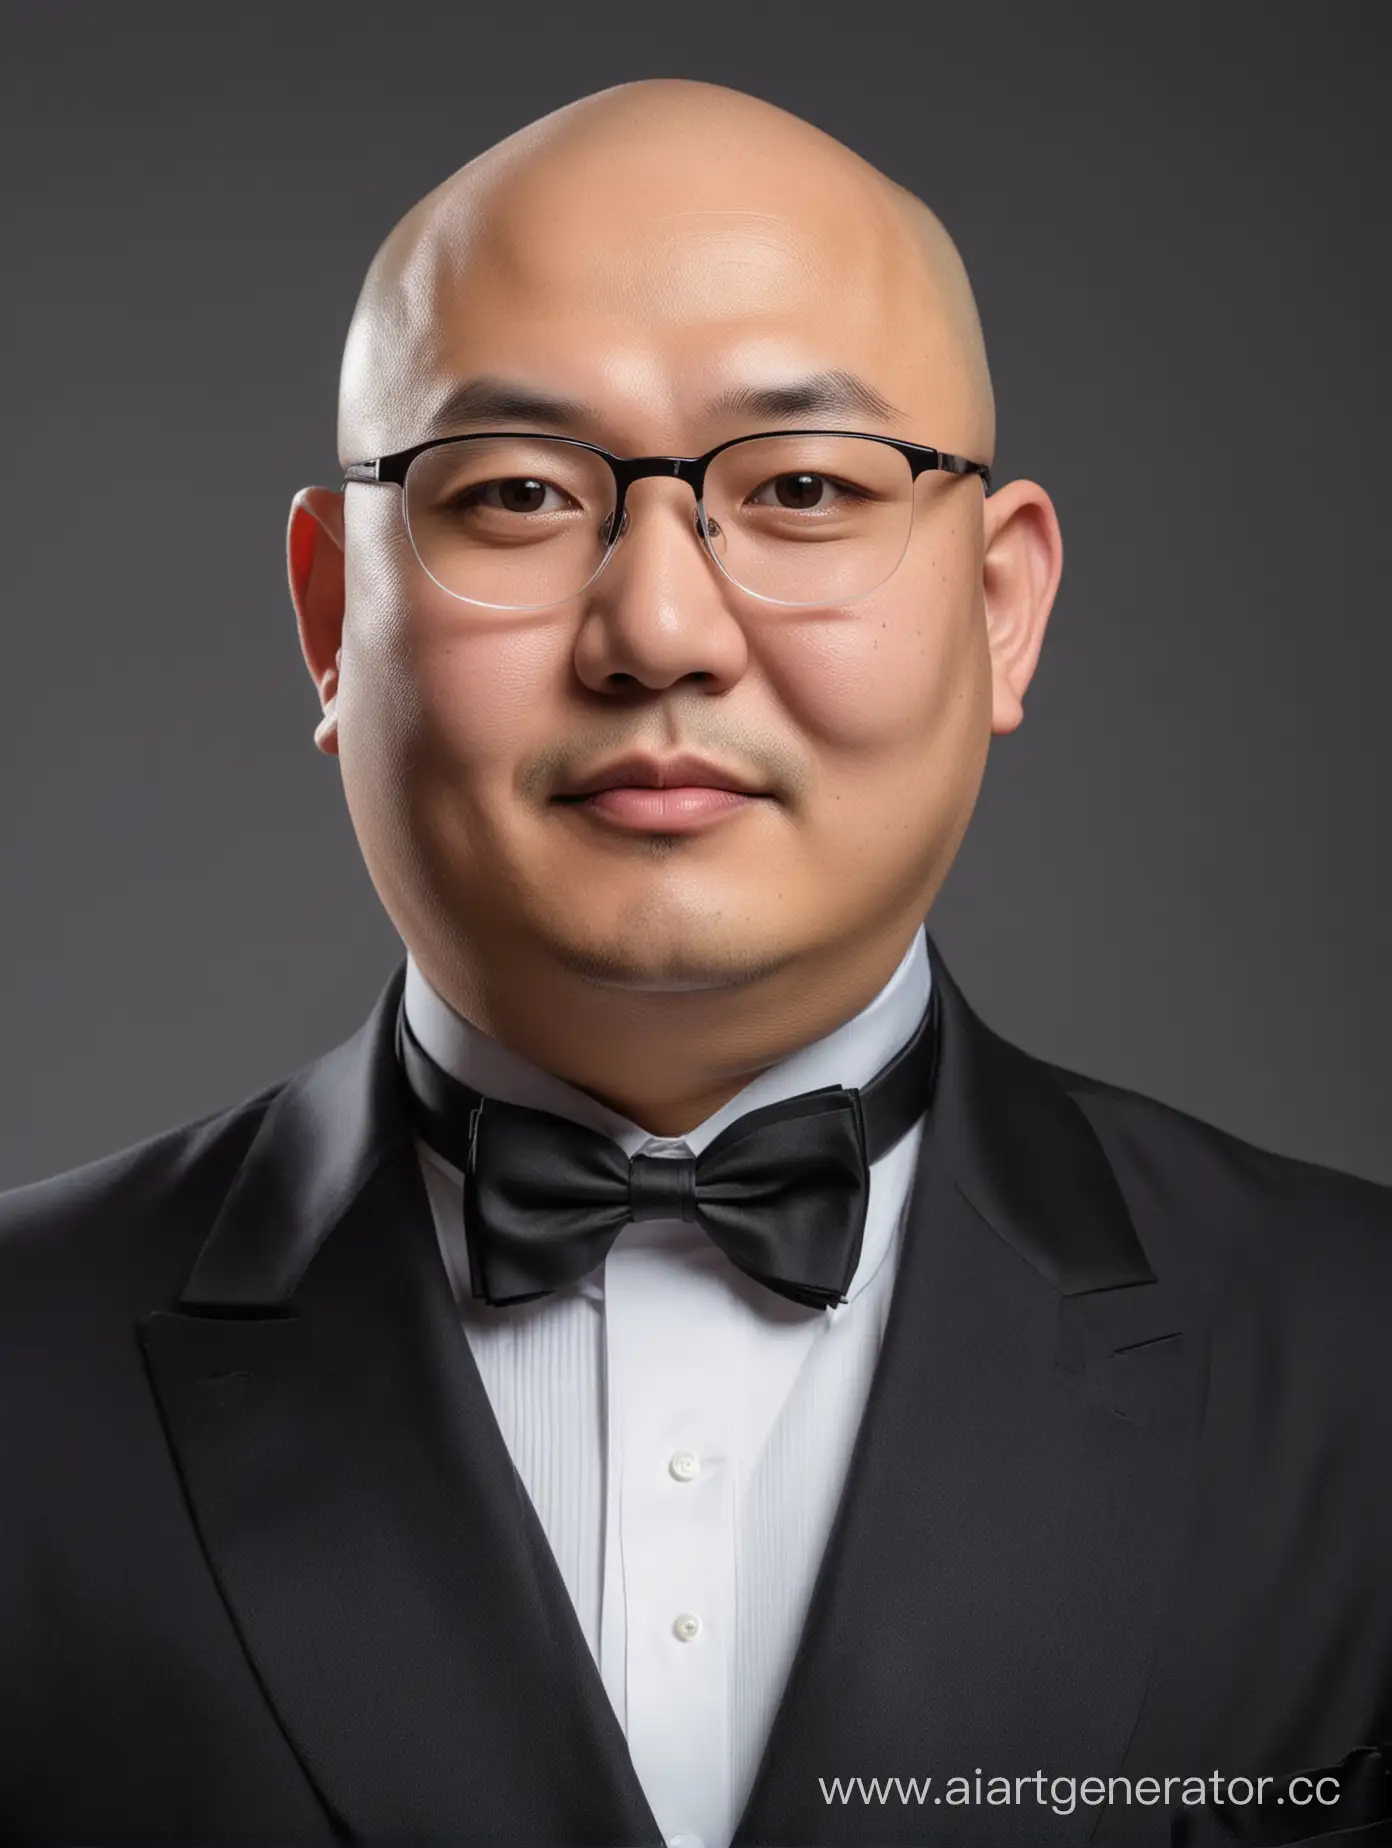 Elegant-Chinese-Man-in-Tuxedo-and-Glasses-Sophisticated-Style-Portrait